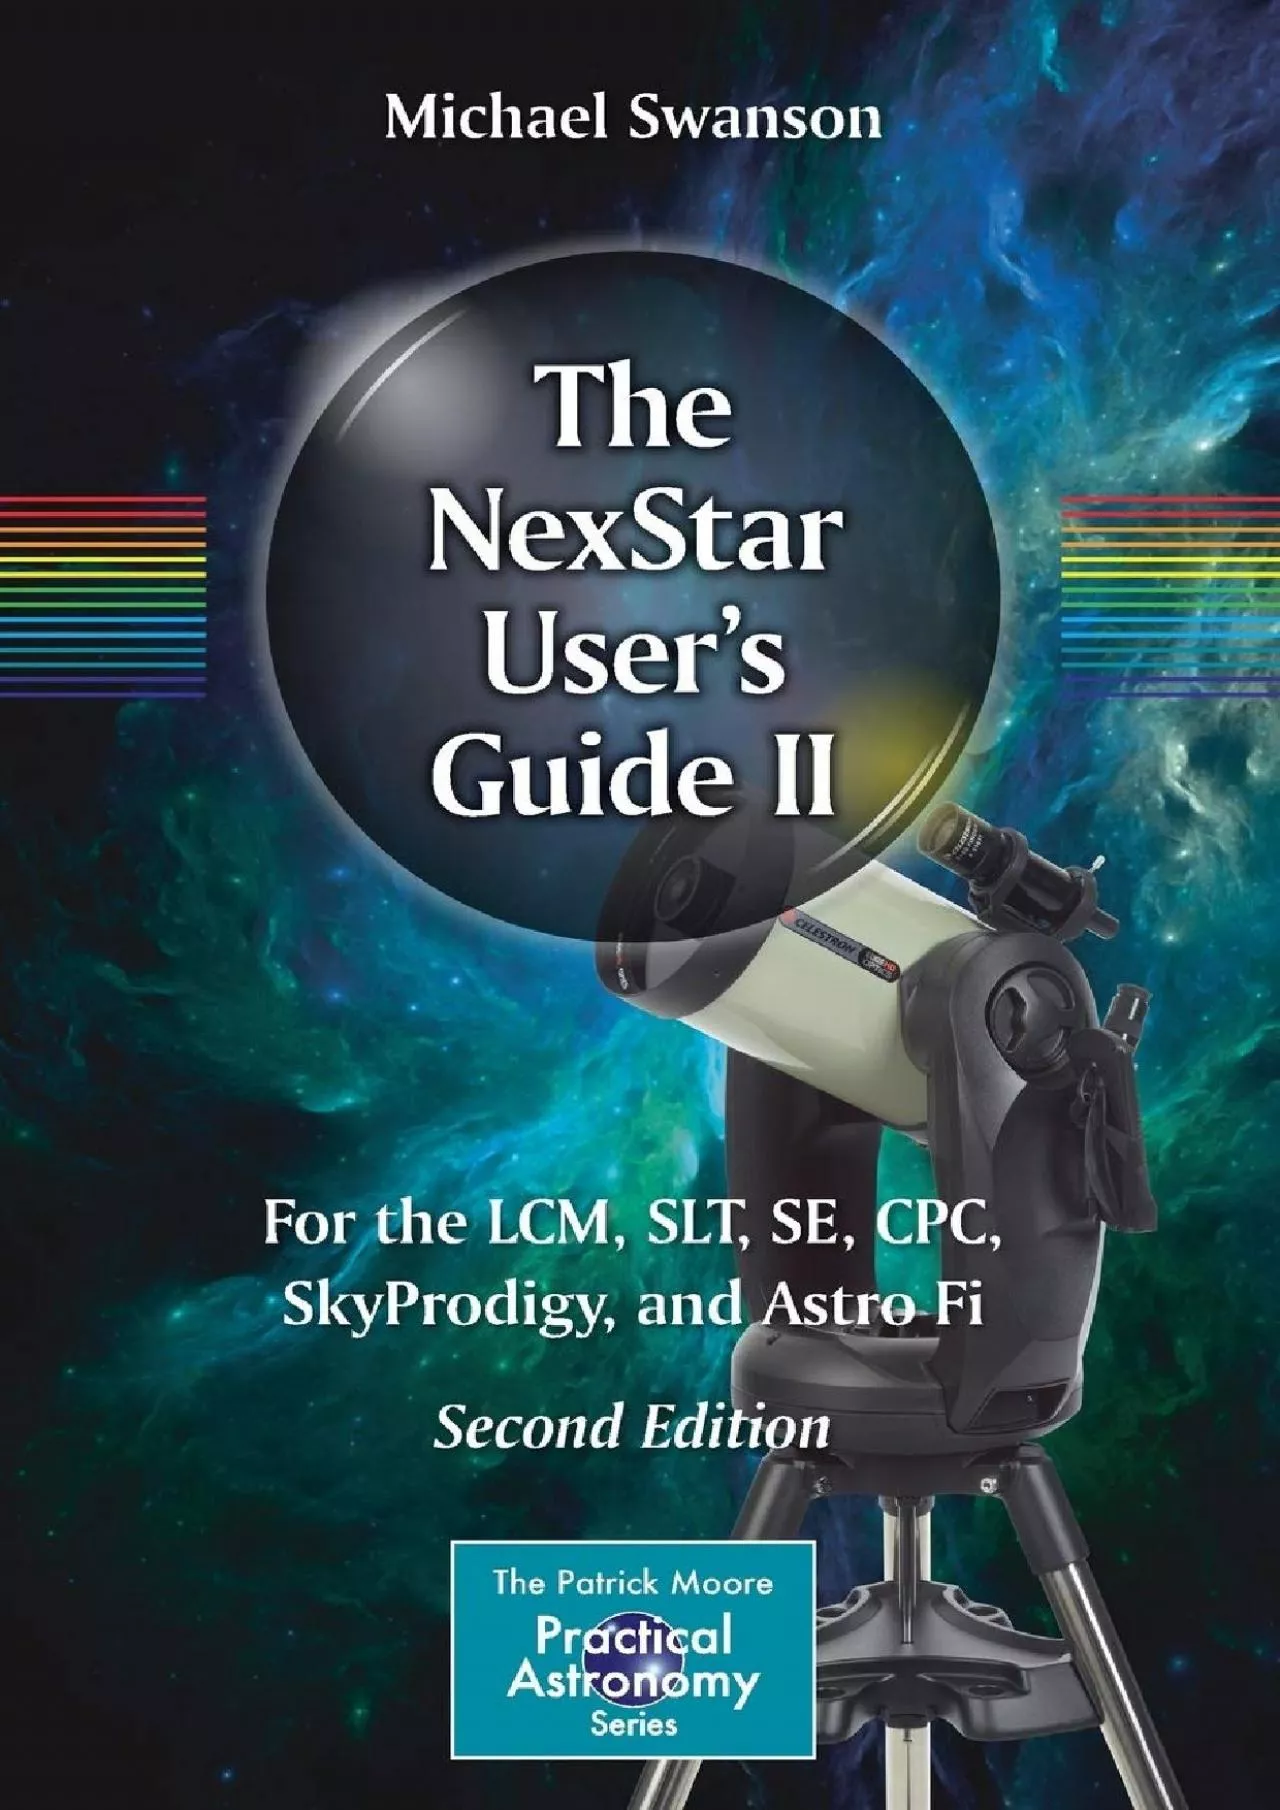 (BOOK)-The NexStar User’s Guide II: For the LCM, SLT, SE, CPC, SkyProdigy, and Astro